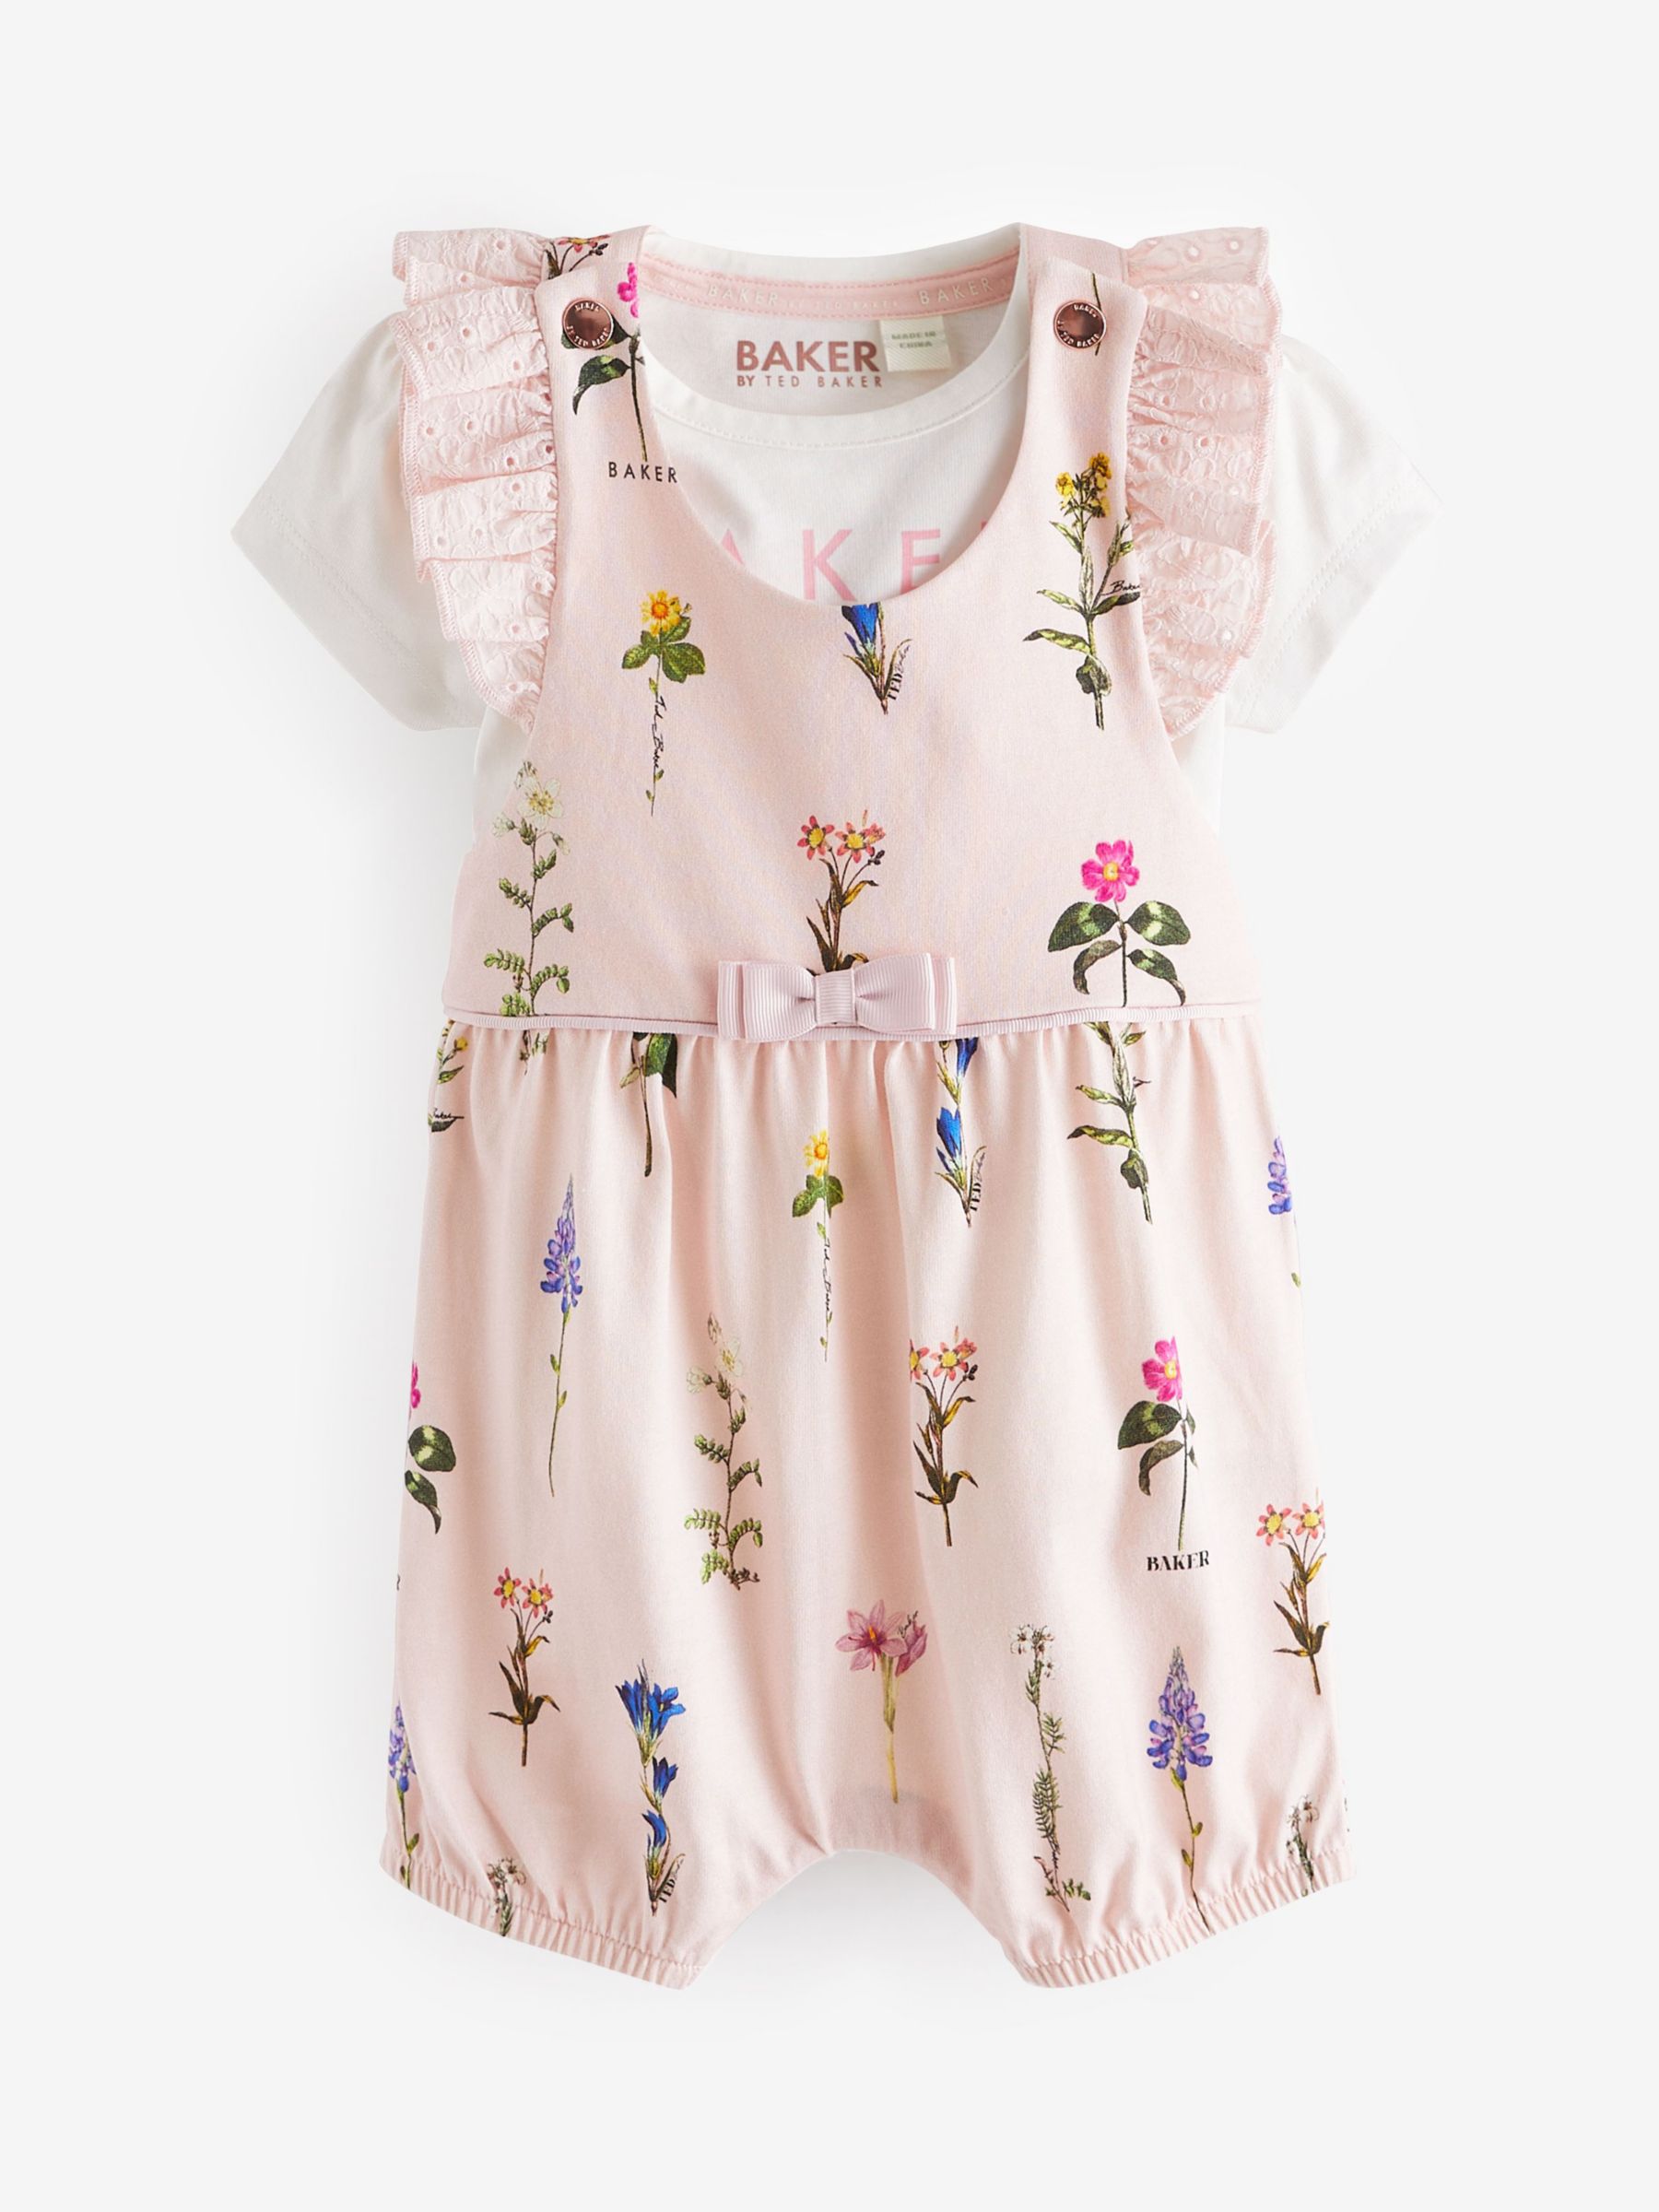 Ted Baker Baby Floral Print Frill Romper & T-Shirt Set, Pink/White, 3-6 months